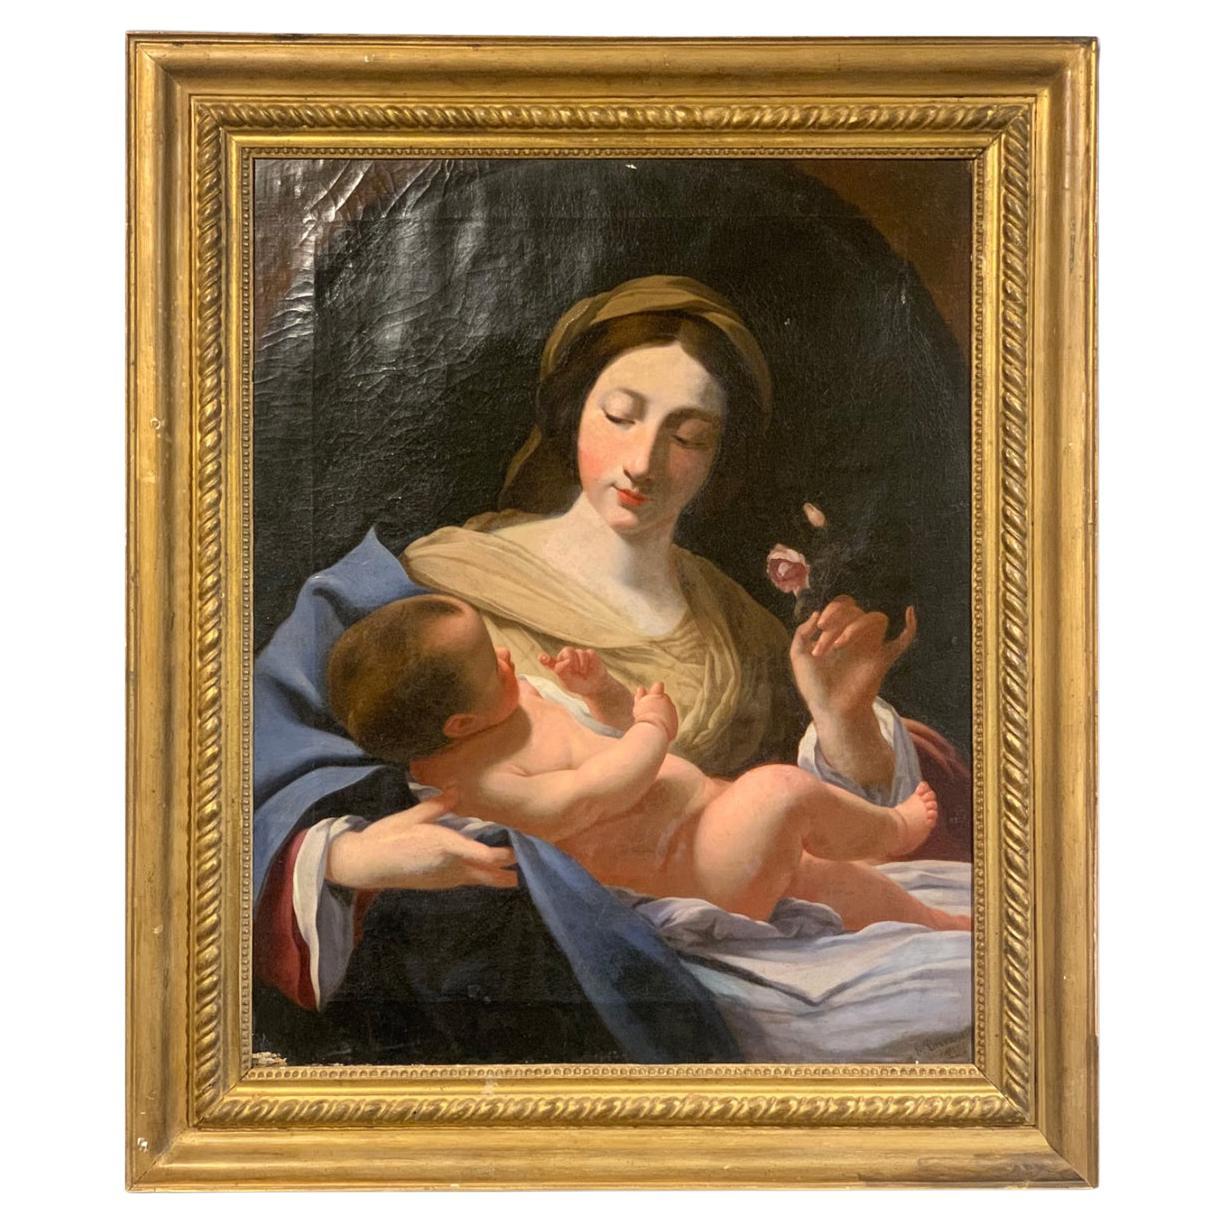 19th CENTURY PAINTING MADONNA AND CHILD 